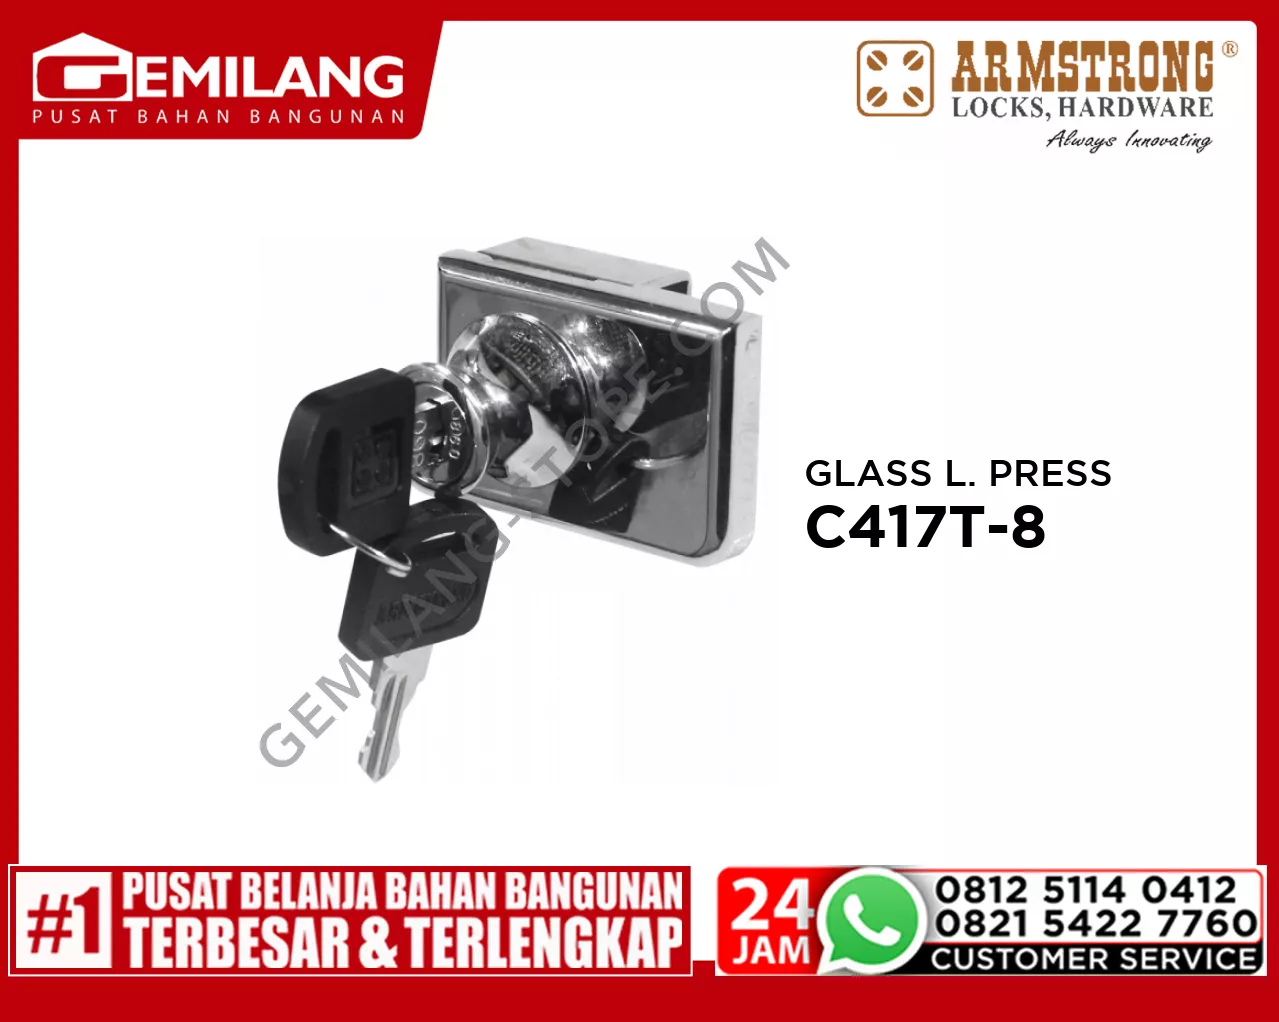 ARMSTRONG GLASS LOCK PRESS C417T-8 DOUBLE RECTANGLE 8mm CH ZINC ALLOY